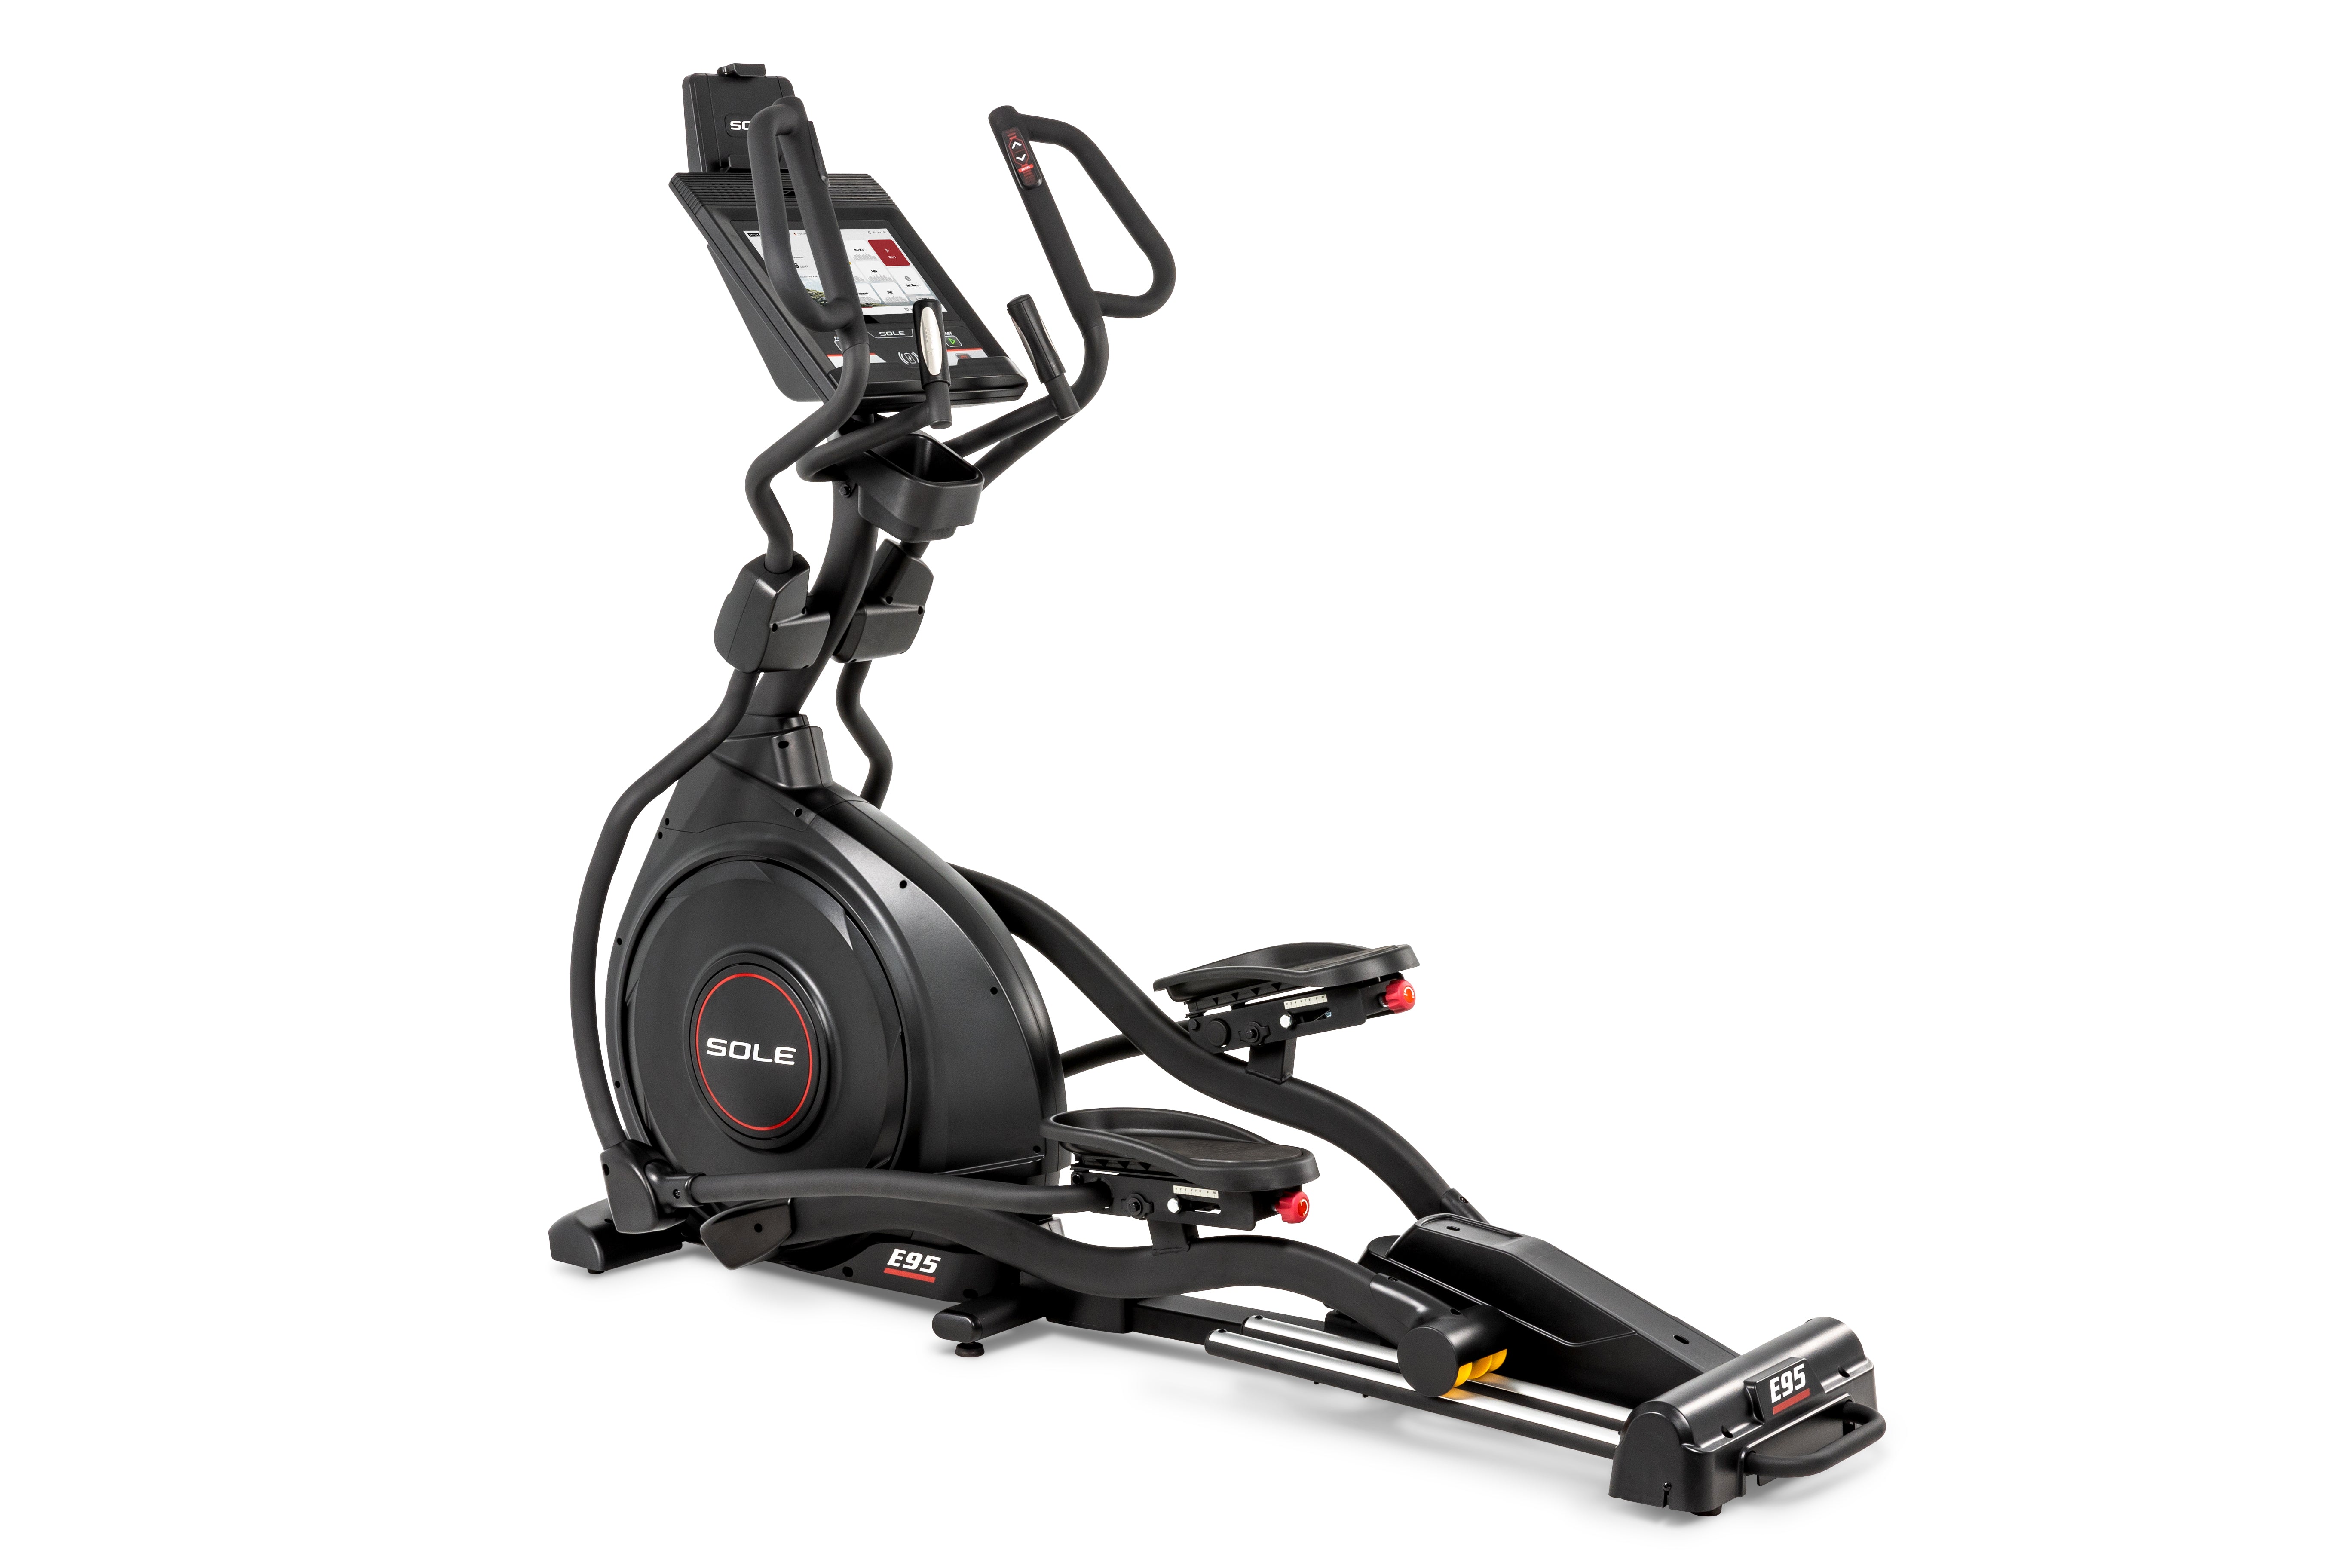 Sole E95 elliptical trainer featuring a digital display monitor, ergonomic handlebars, and adjustable foot pedals, set against a black and silver frame with the prominent 'SOLE' logo on the main wheel and 'E95' branding on the base.